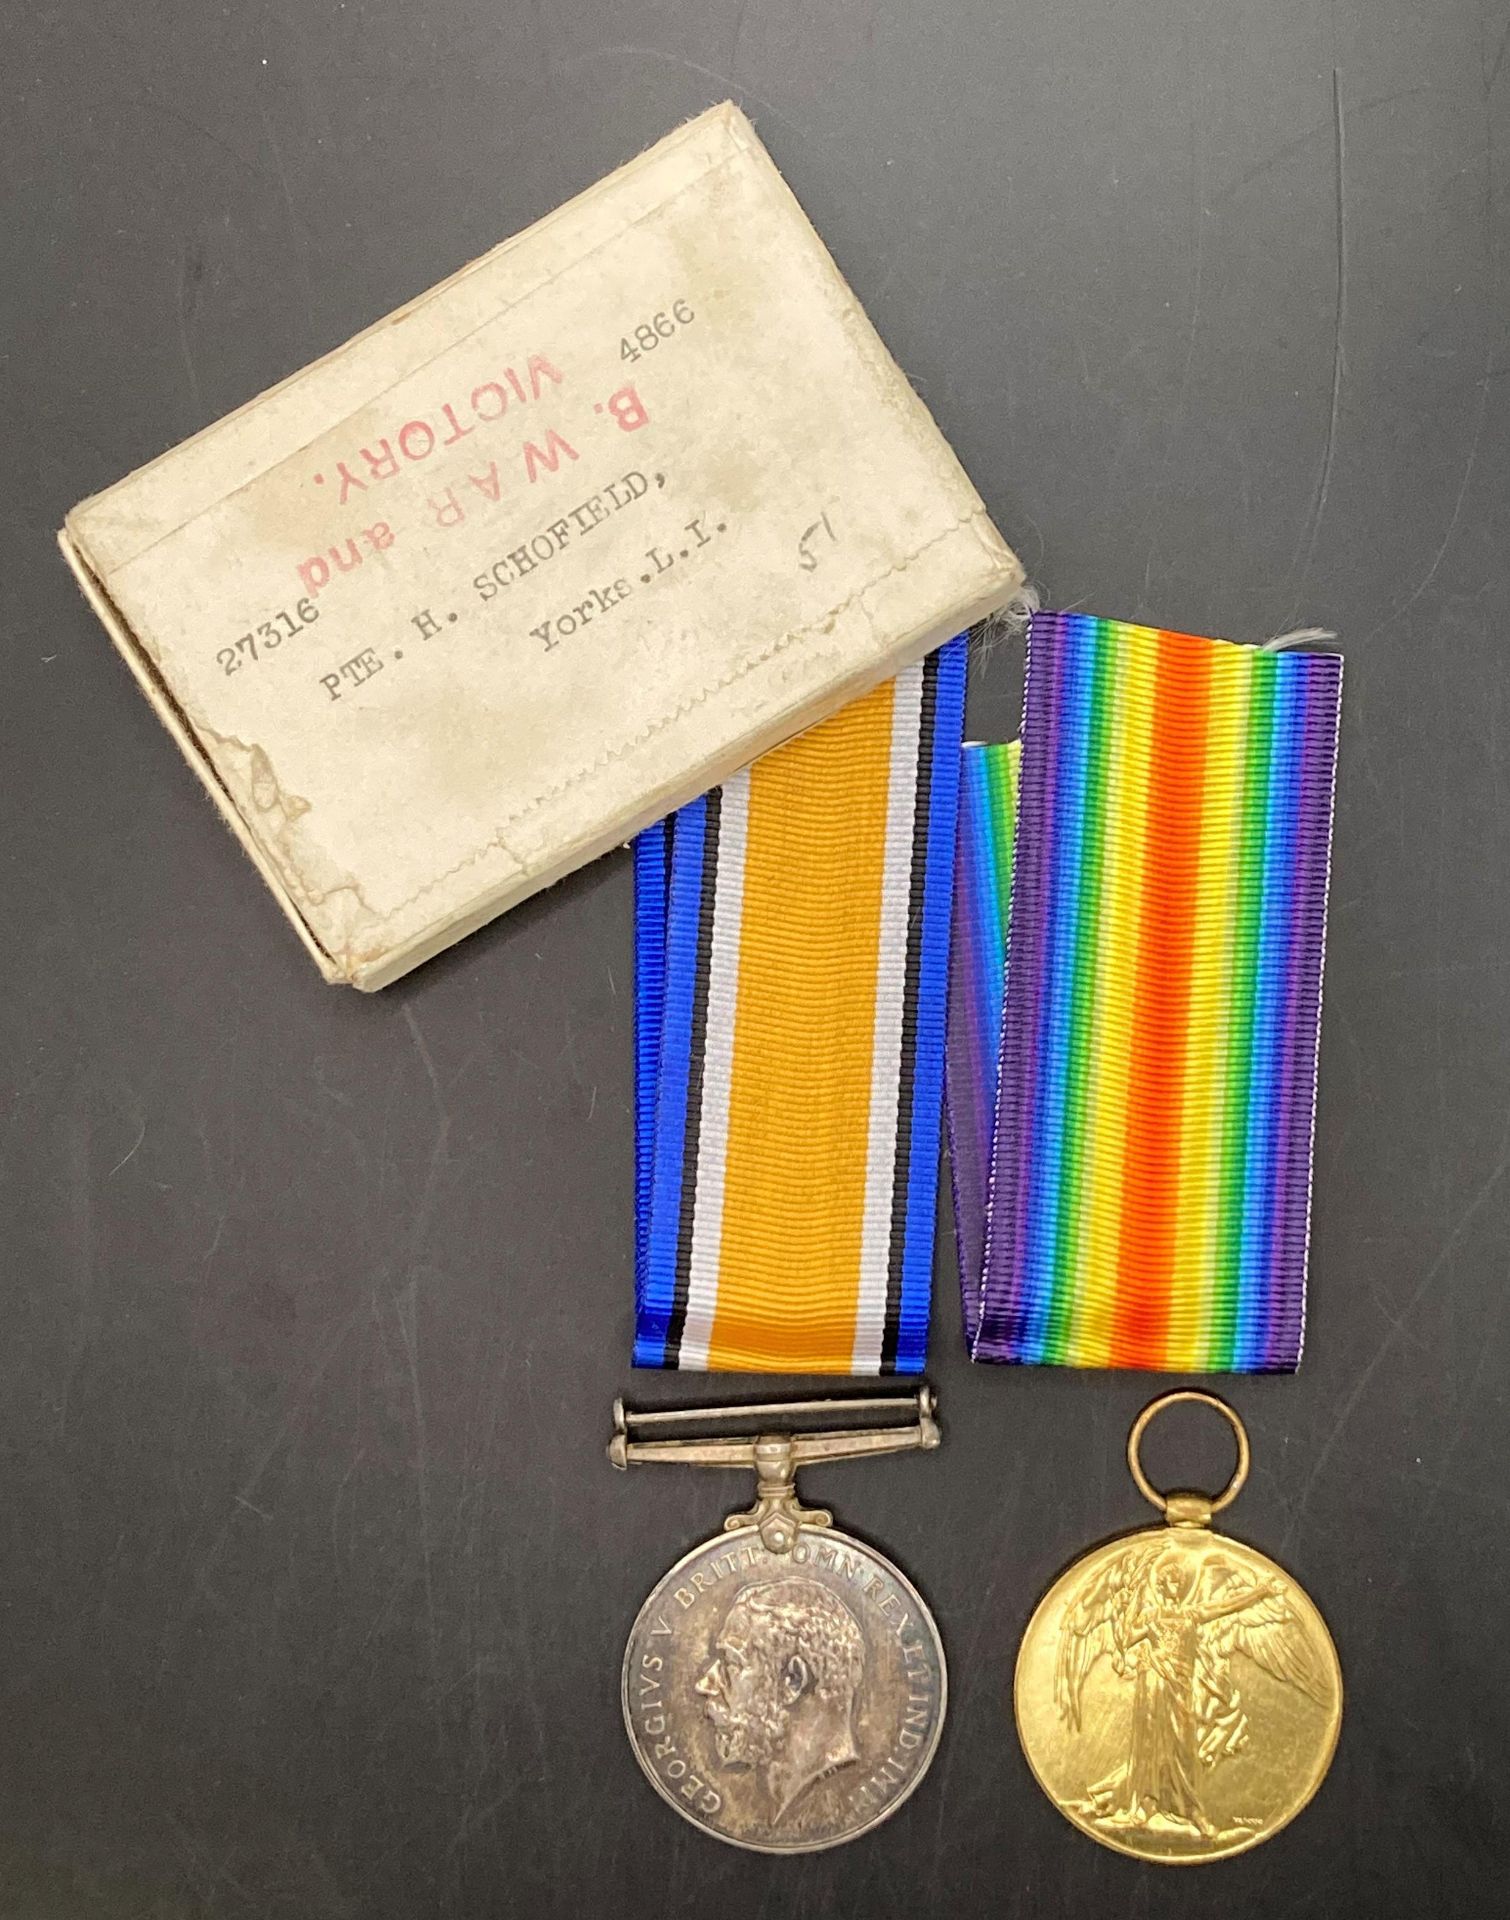 Two First World War medals - War Medal and Victory Medal complete with ribbons and with box of